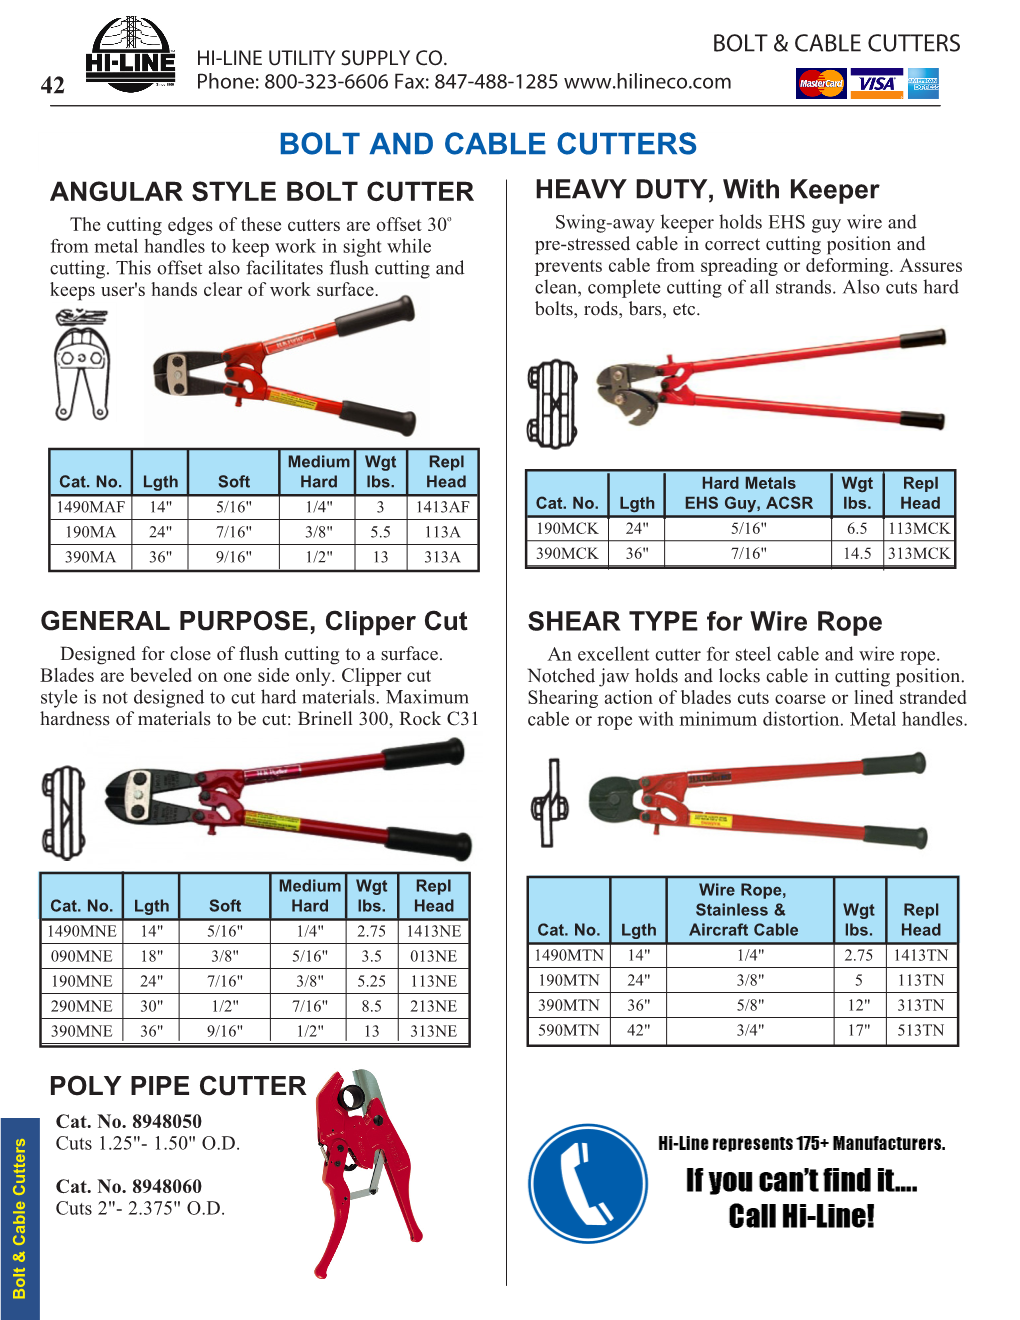 Bolt and Cable Cutters